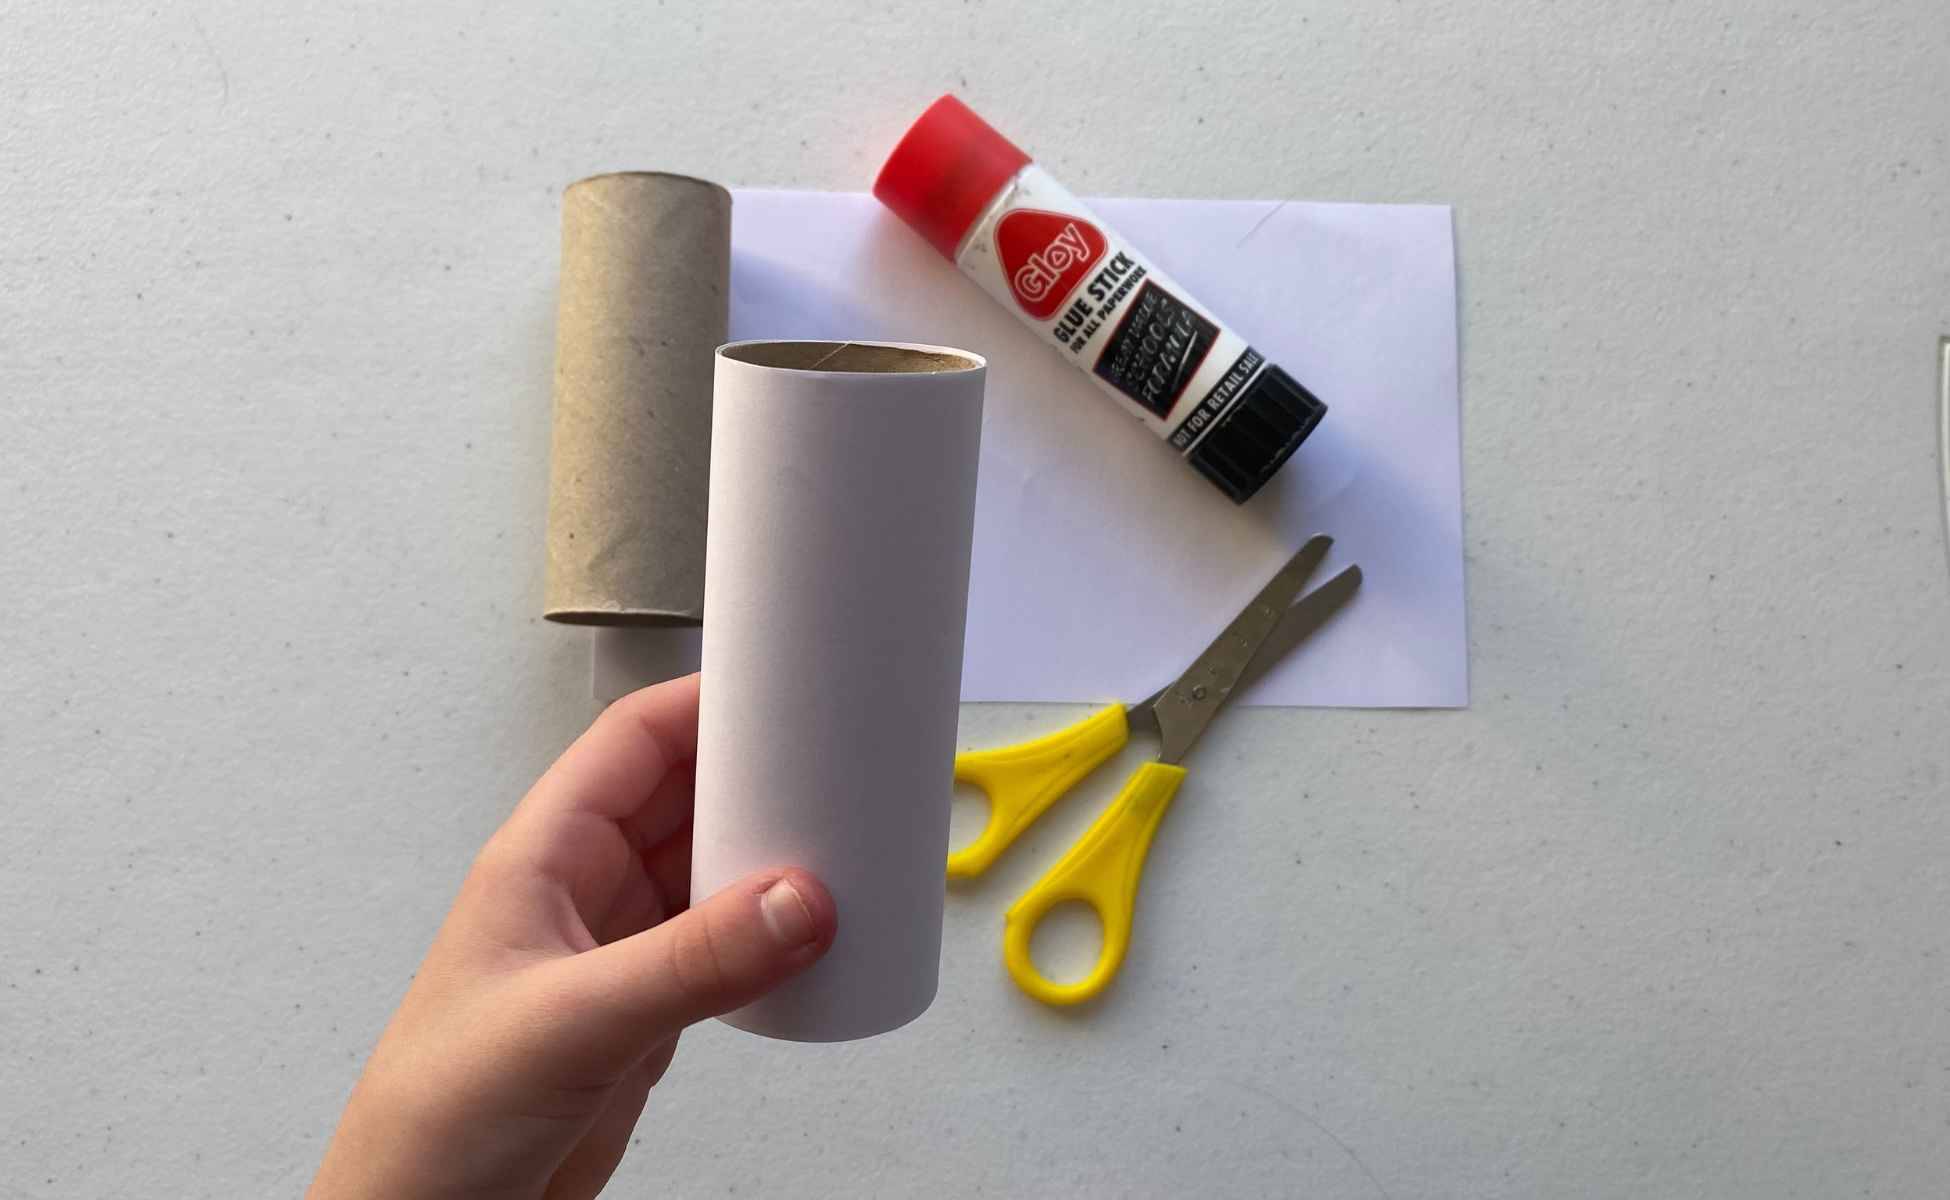 Child's hand holding toilet roll tube with glue, scissors and white paper on the table. Step one of making the snowman strike Christmas activity